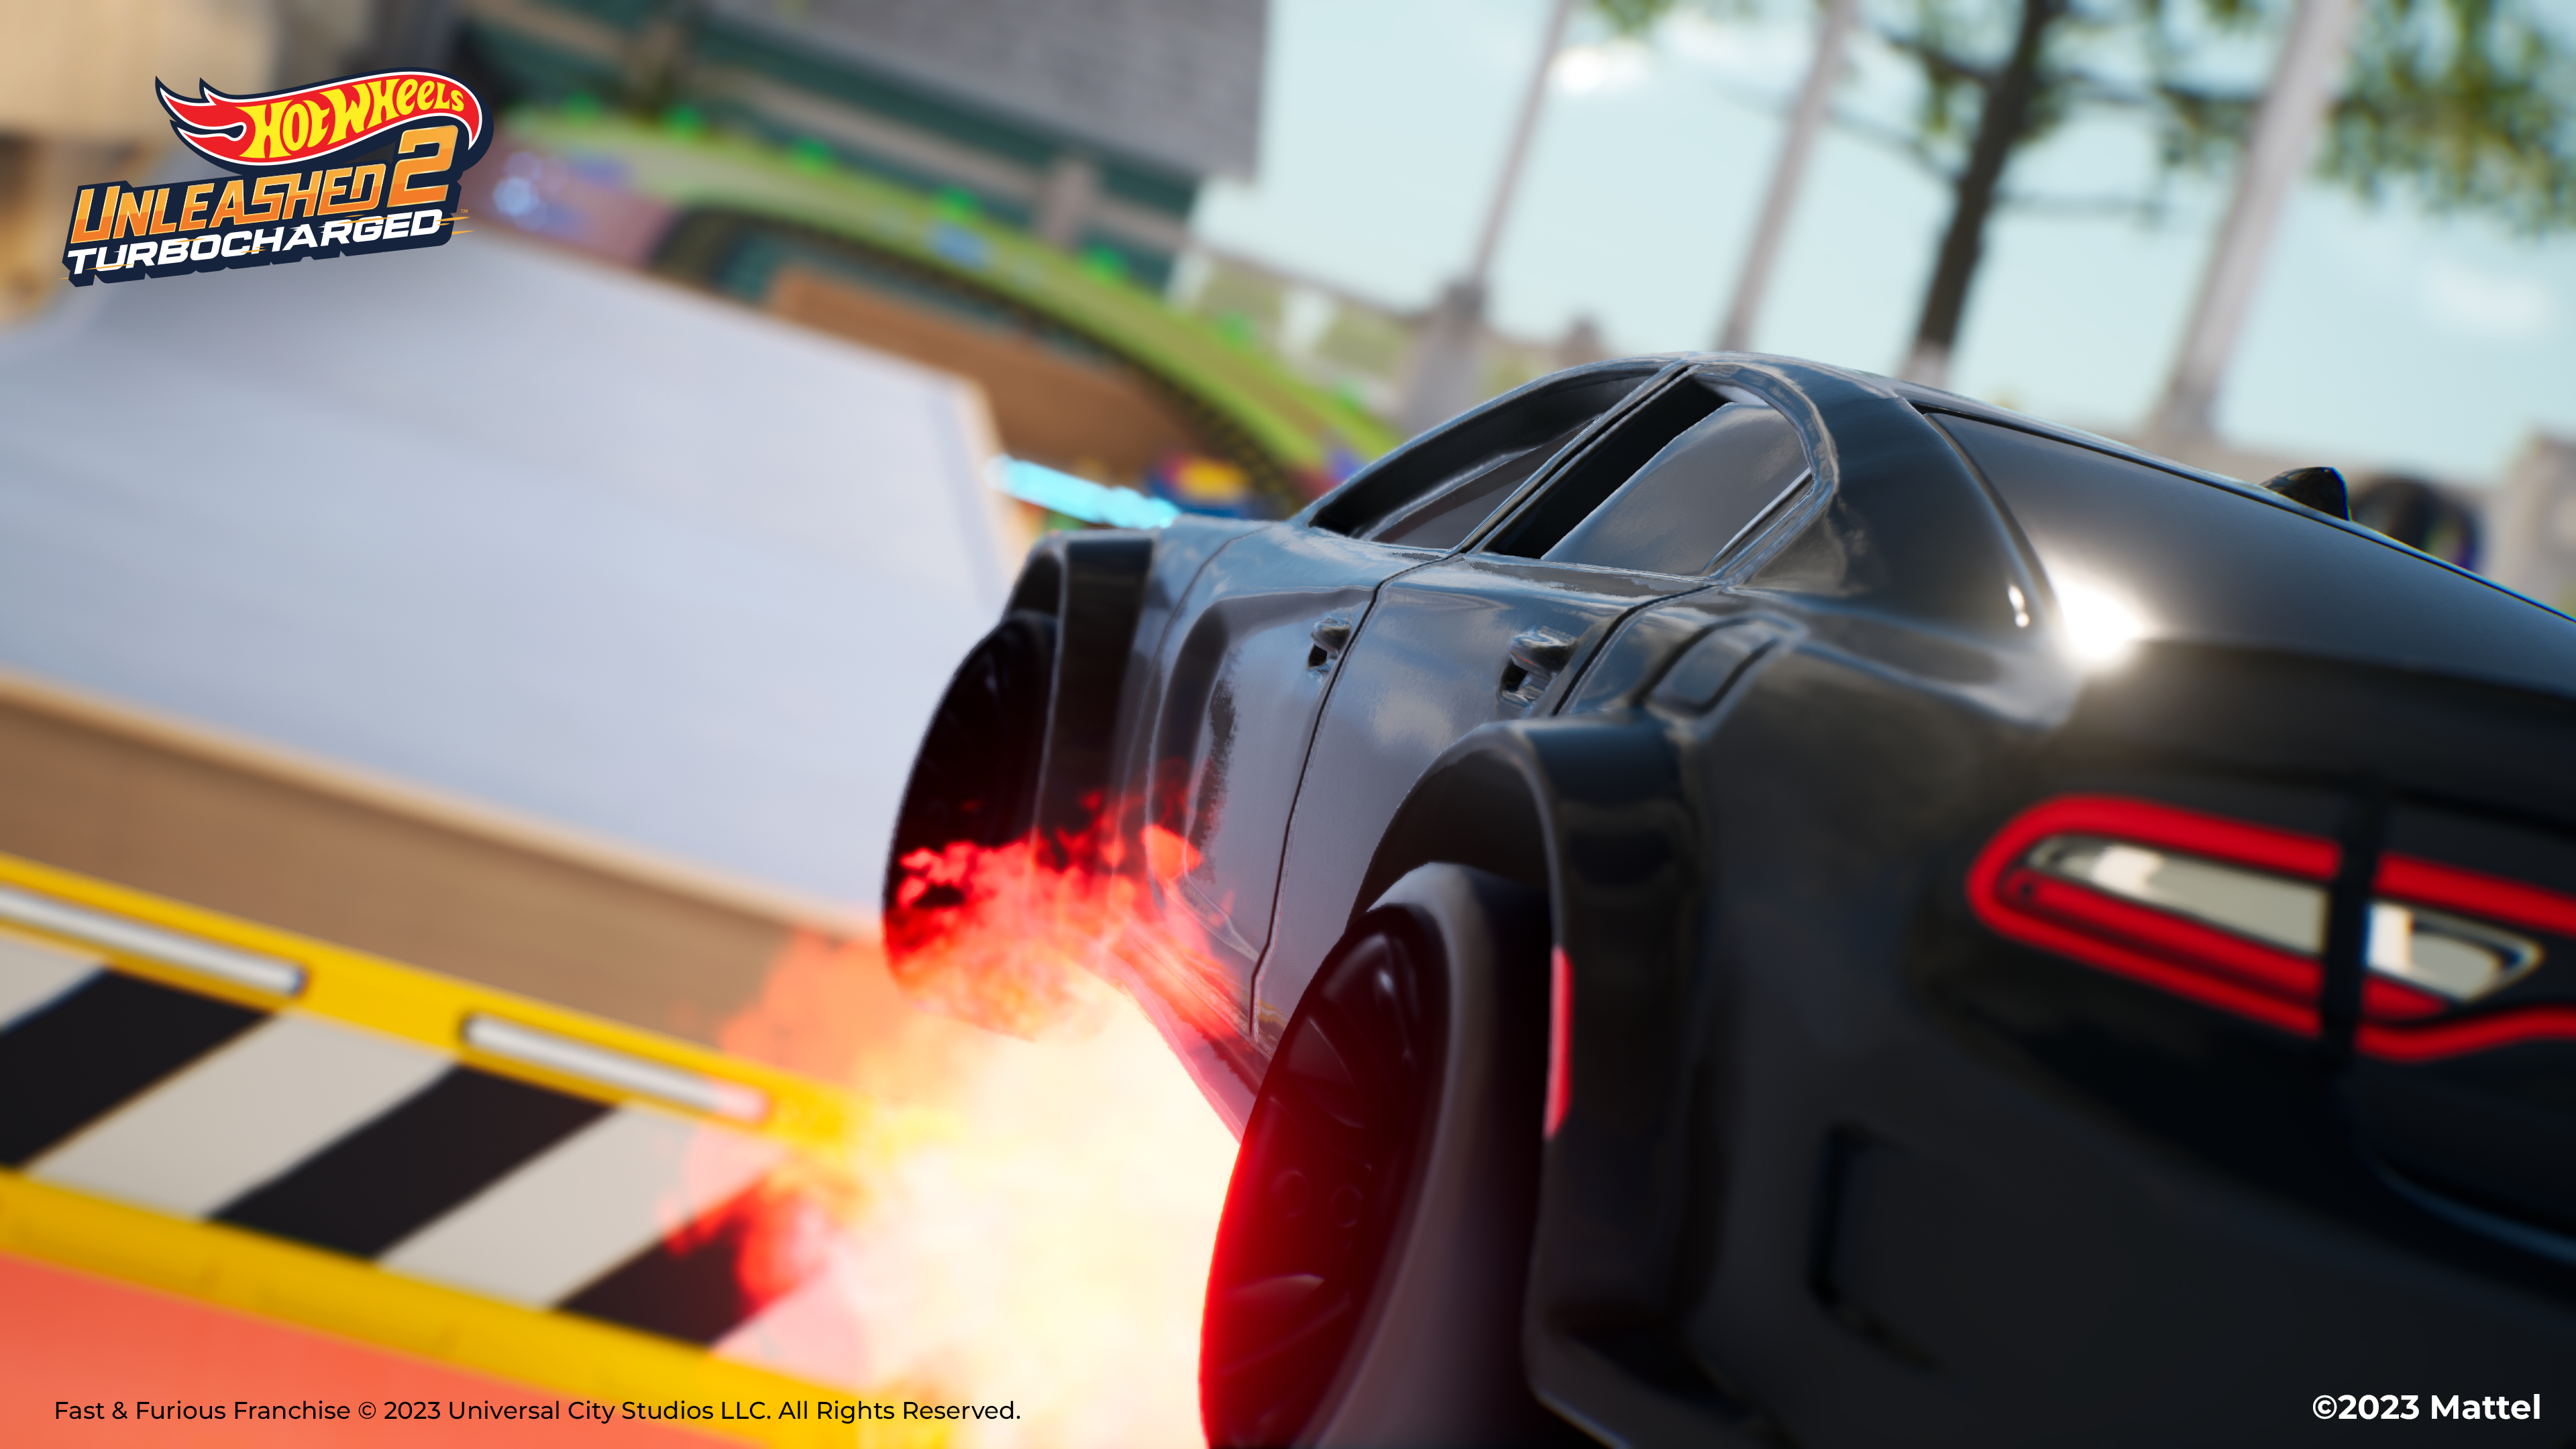 Hot Wheels Unleashed 2: Turbocharged to Feature Fast & Furious Cars